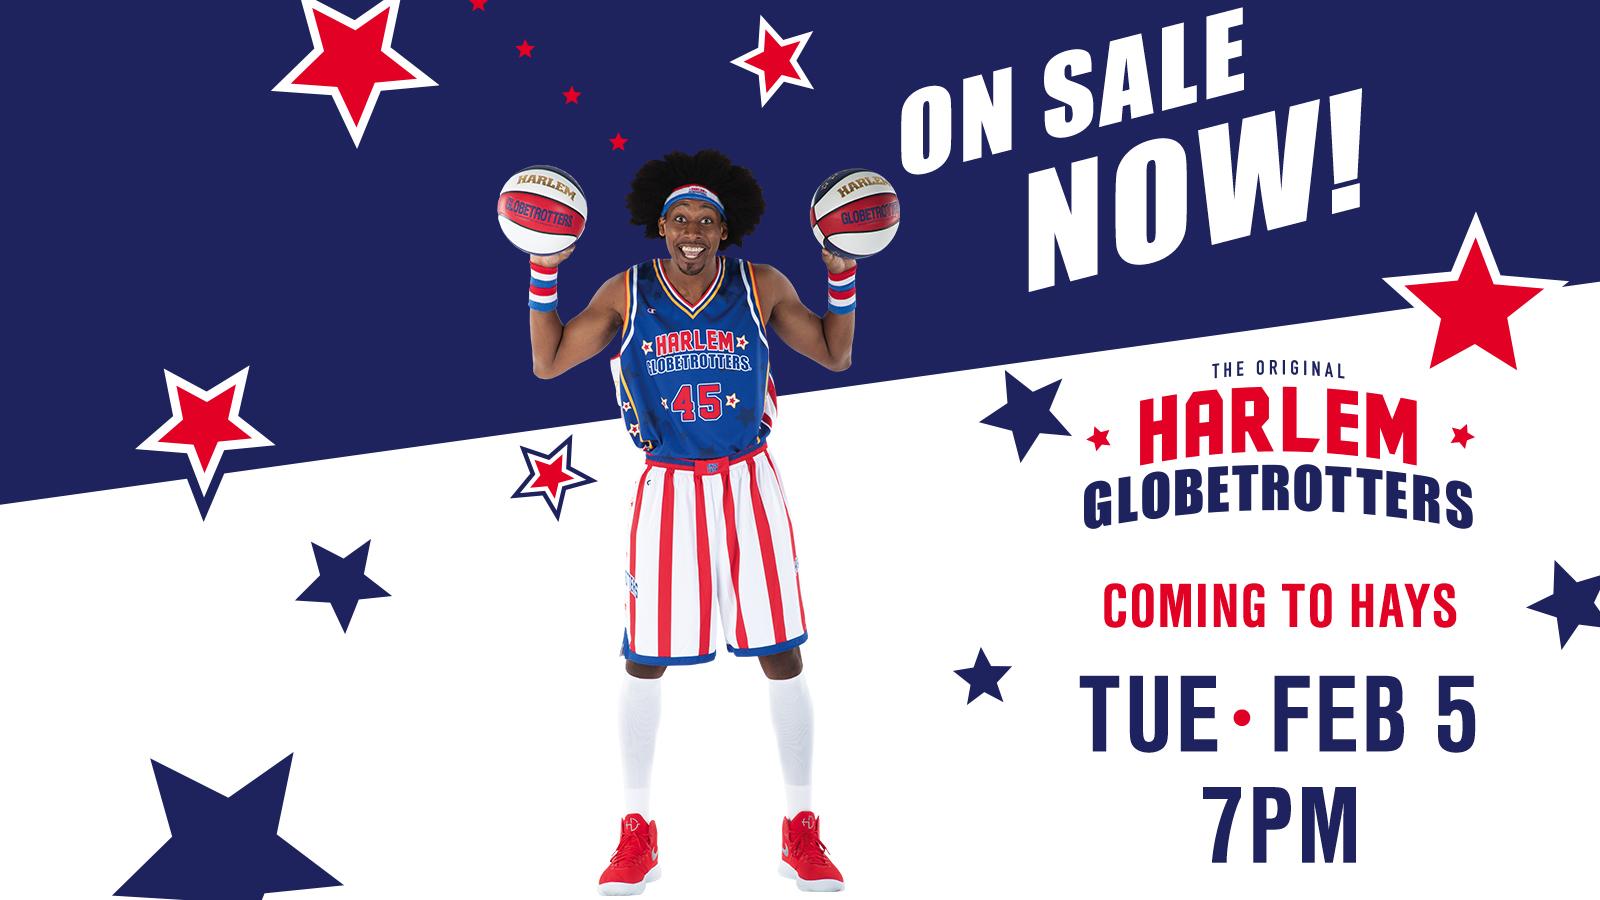 Globetrotters Announce World Tour Stop in Hays February 5